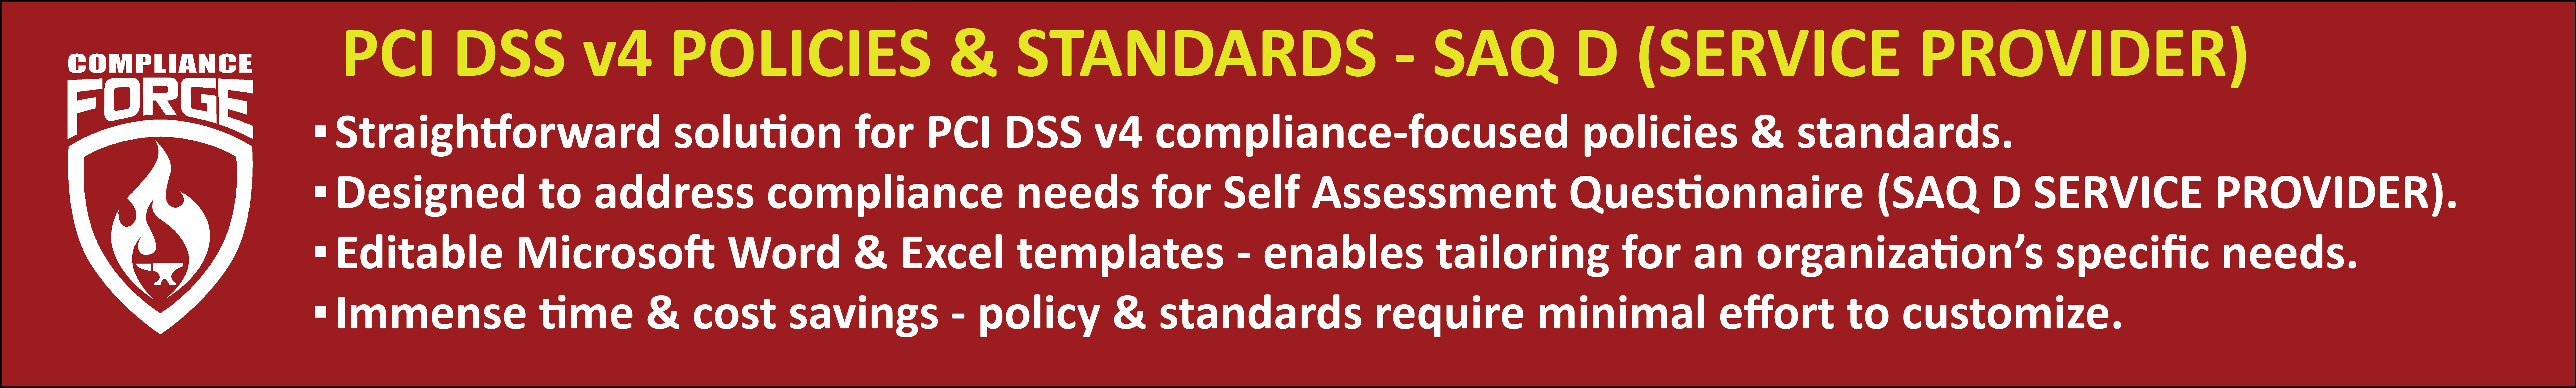 PCI DSS v4 SAQ D Service Provider policies and standards example